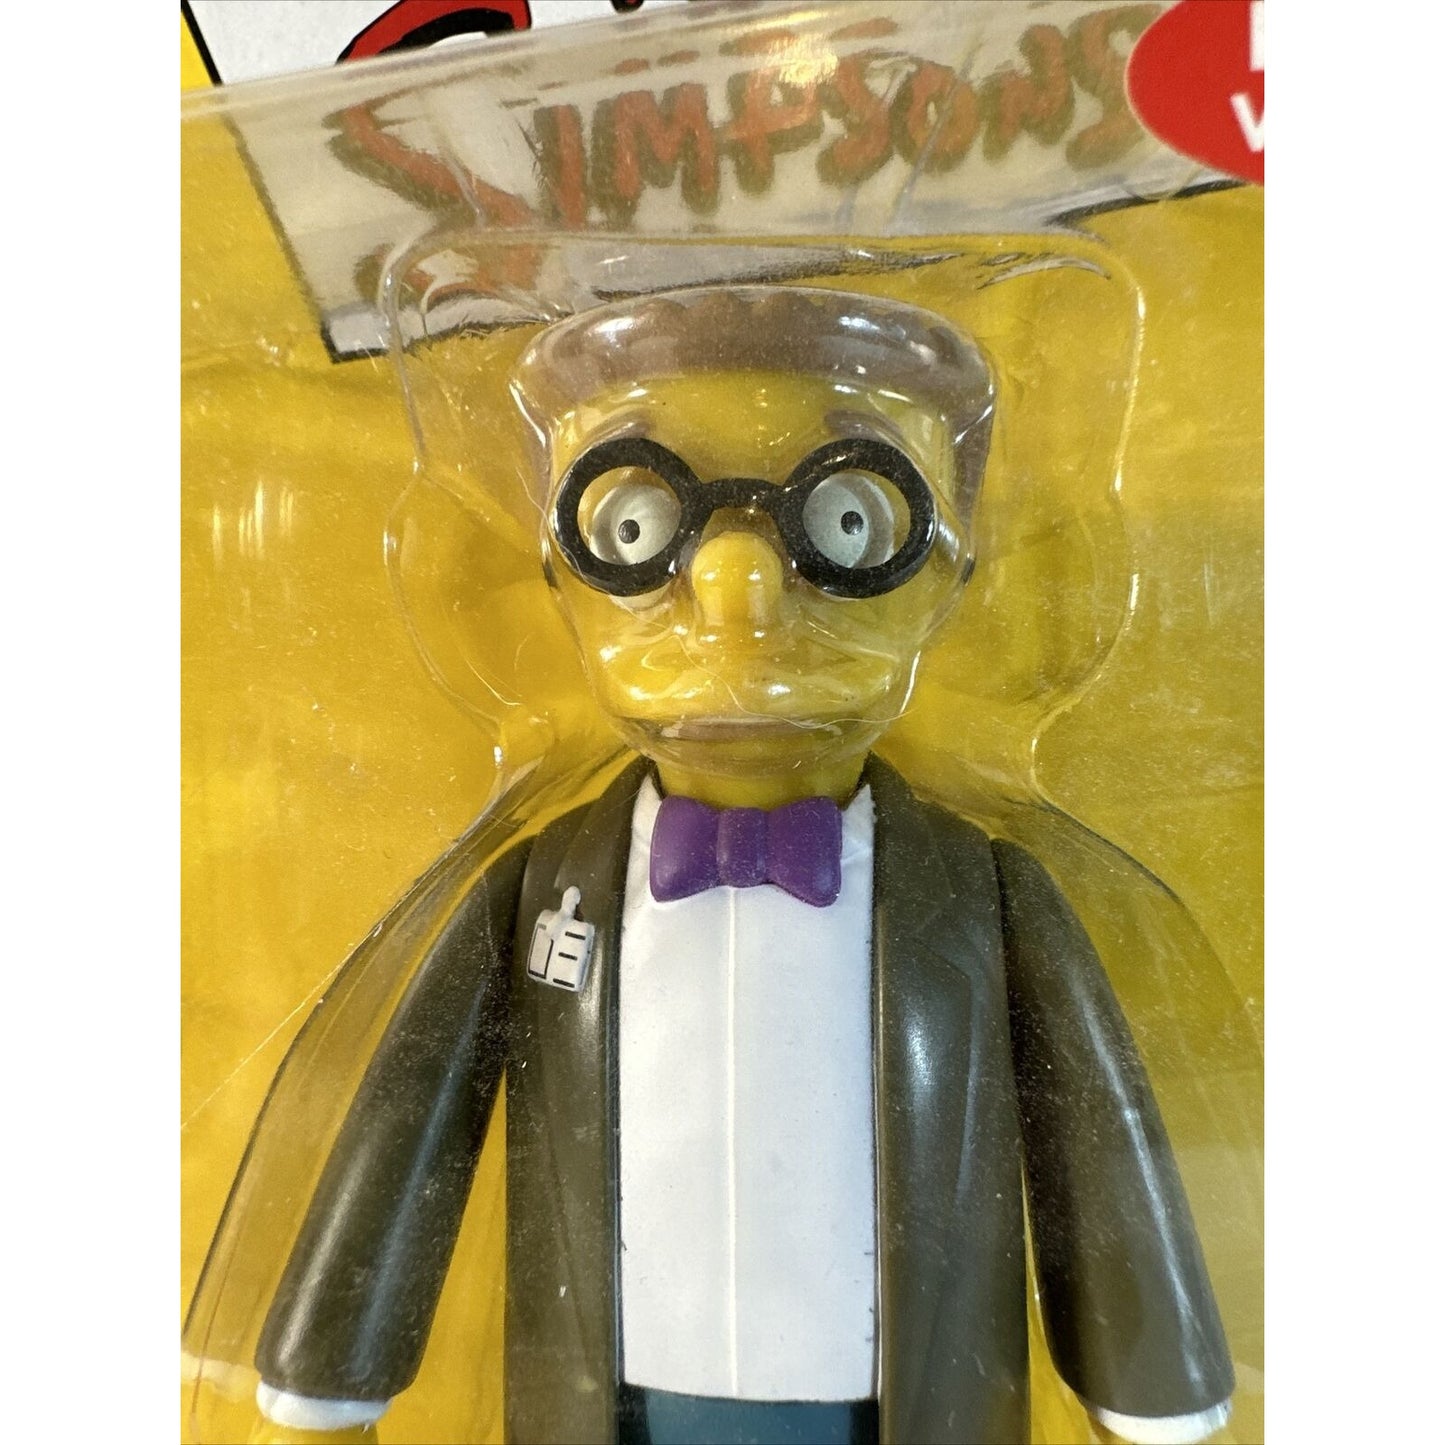 The Simpsons Smithers Series 1  World of Springfield Action Figure Playmates